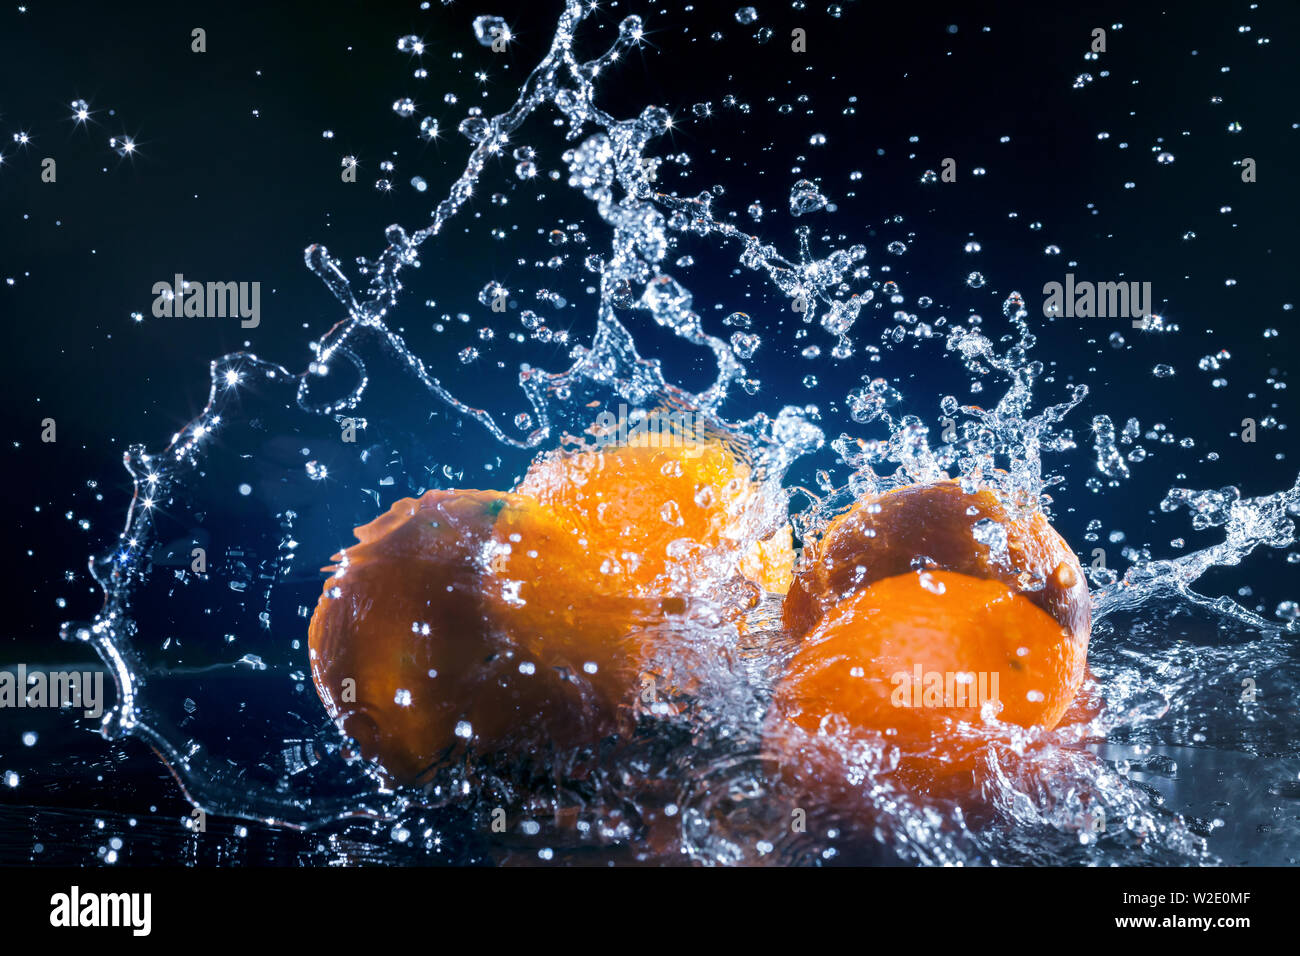 ripe oranges lying on the mirror in a spray of water on dark background Stock Photo